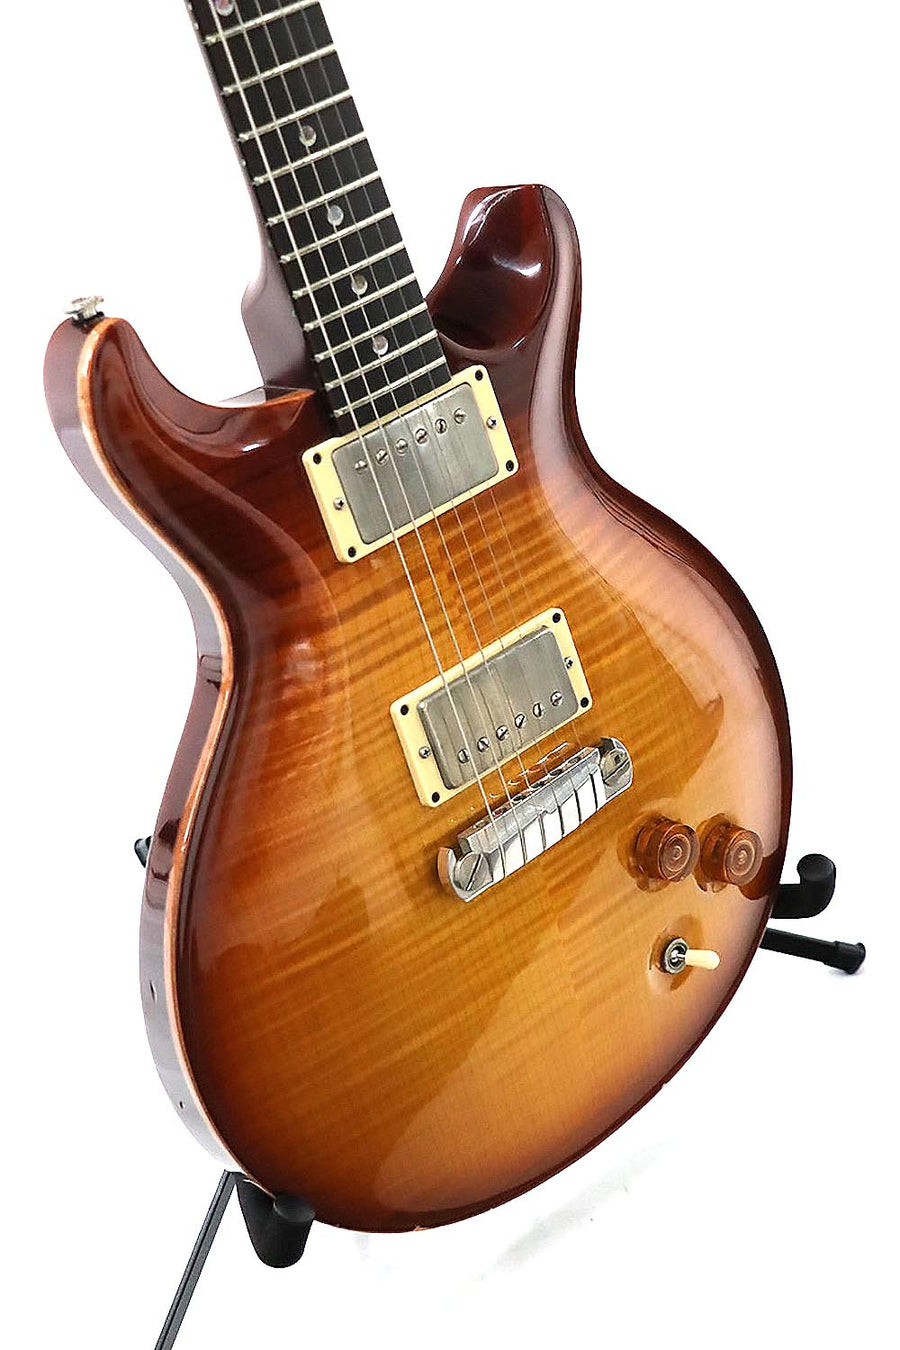 PRS DC22 Limited Edition no 23 of 25